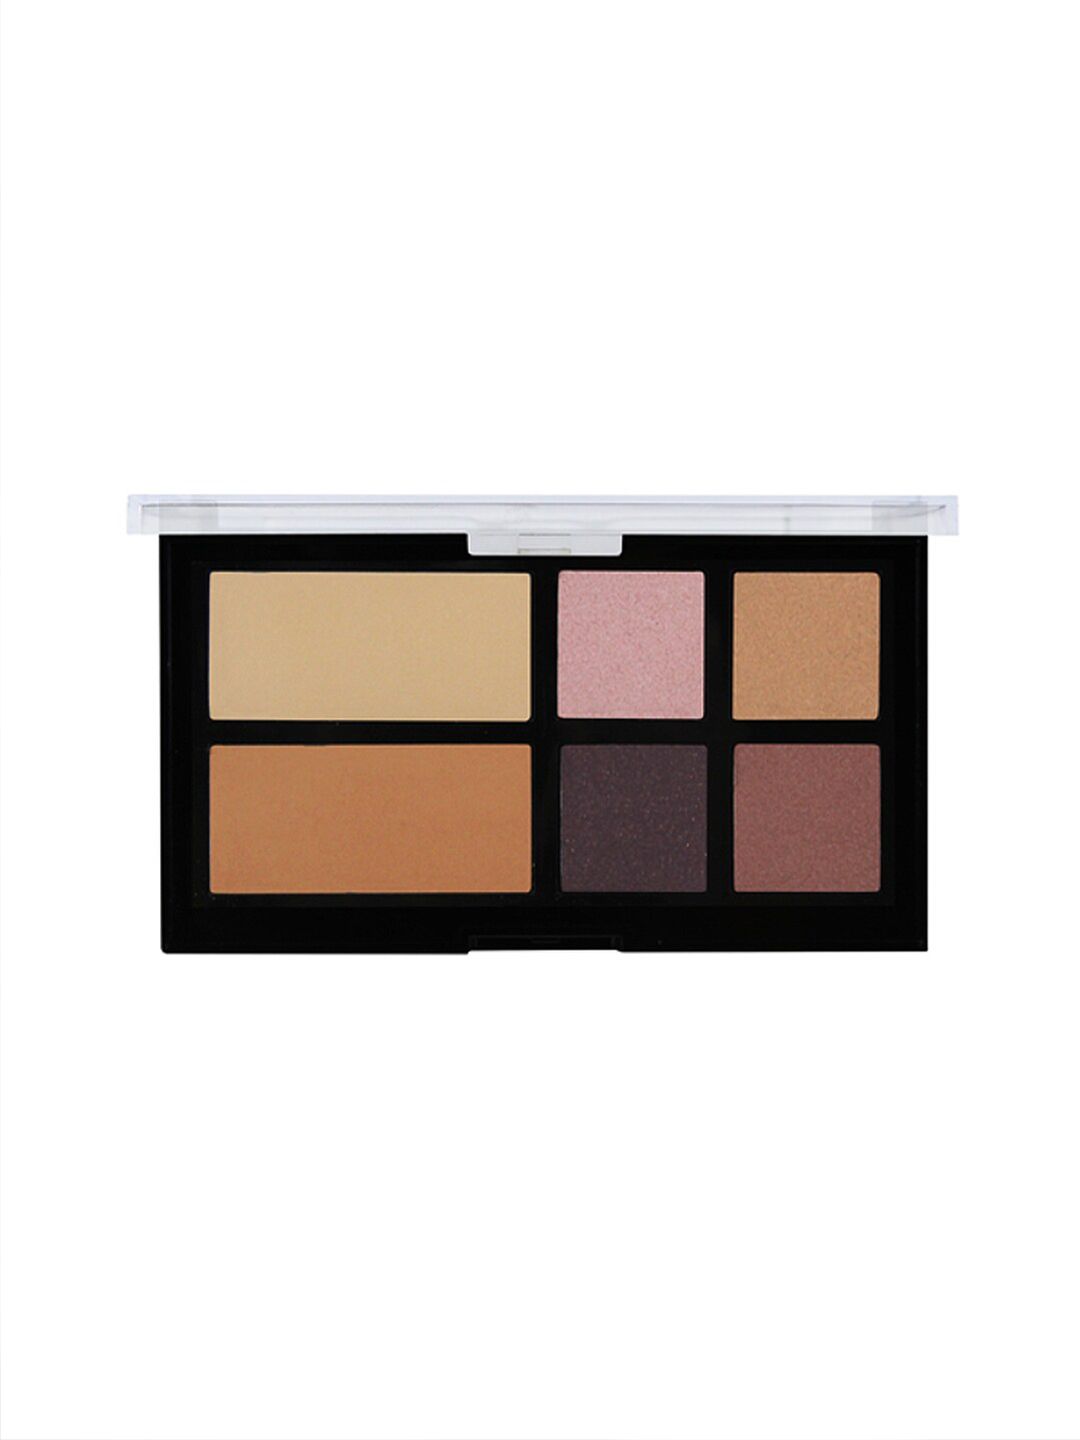 Sivanna Colors Contour - Highlight & Eyeshadow Palette - HF365 04 Price in India